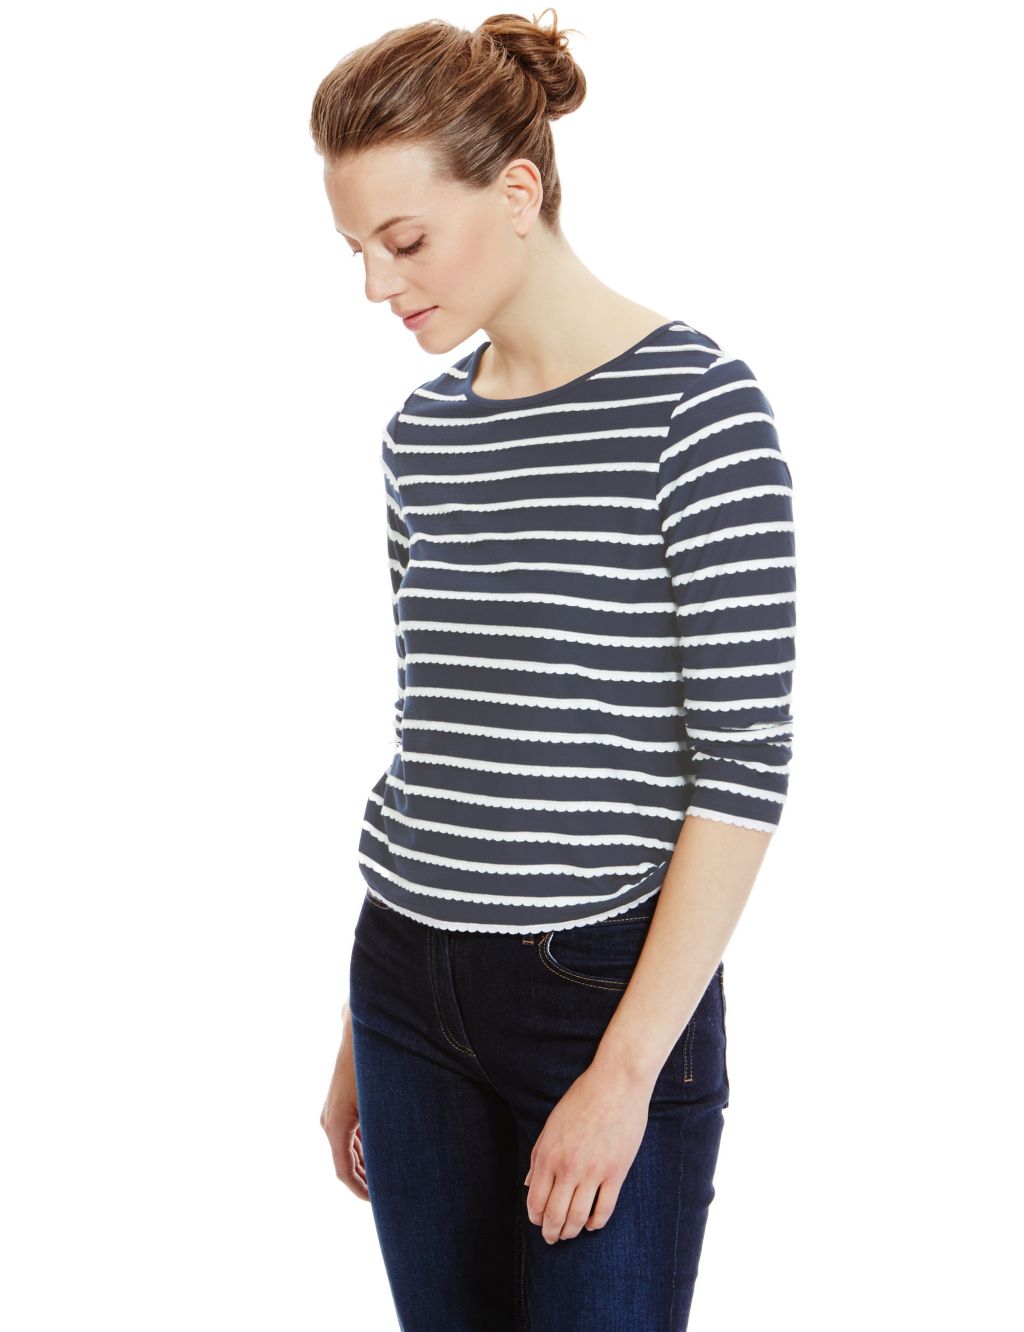 Scallop Striped Marl Top 2 of 4